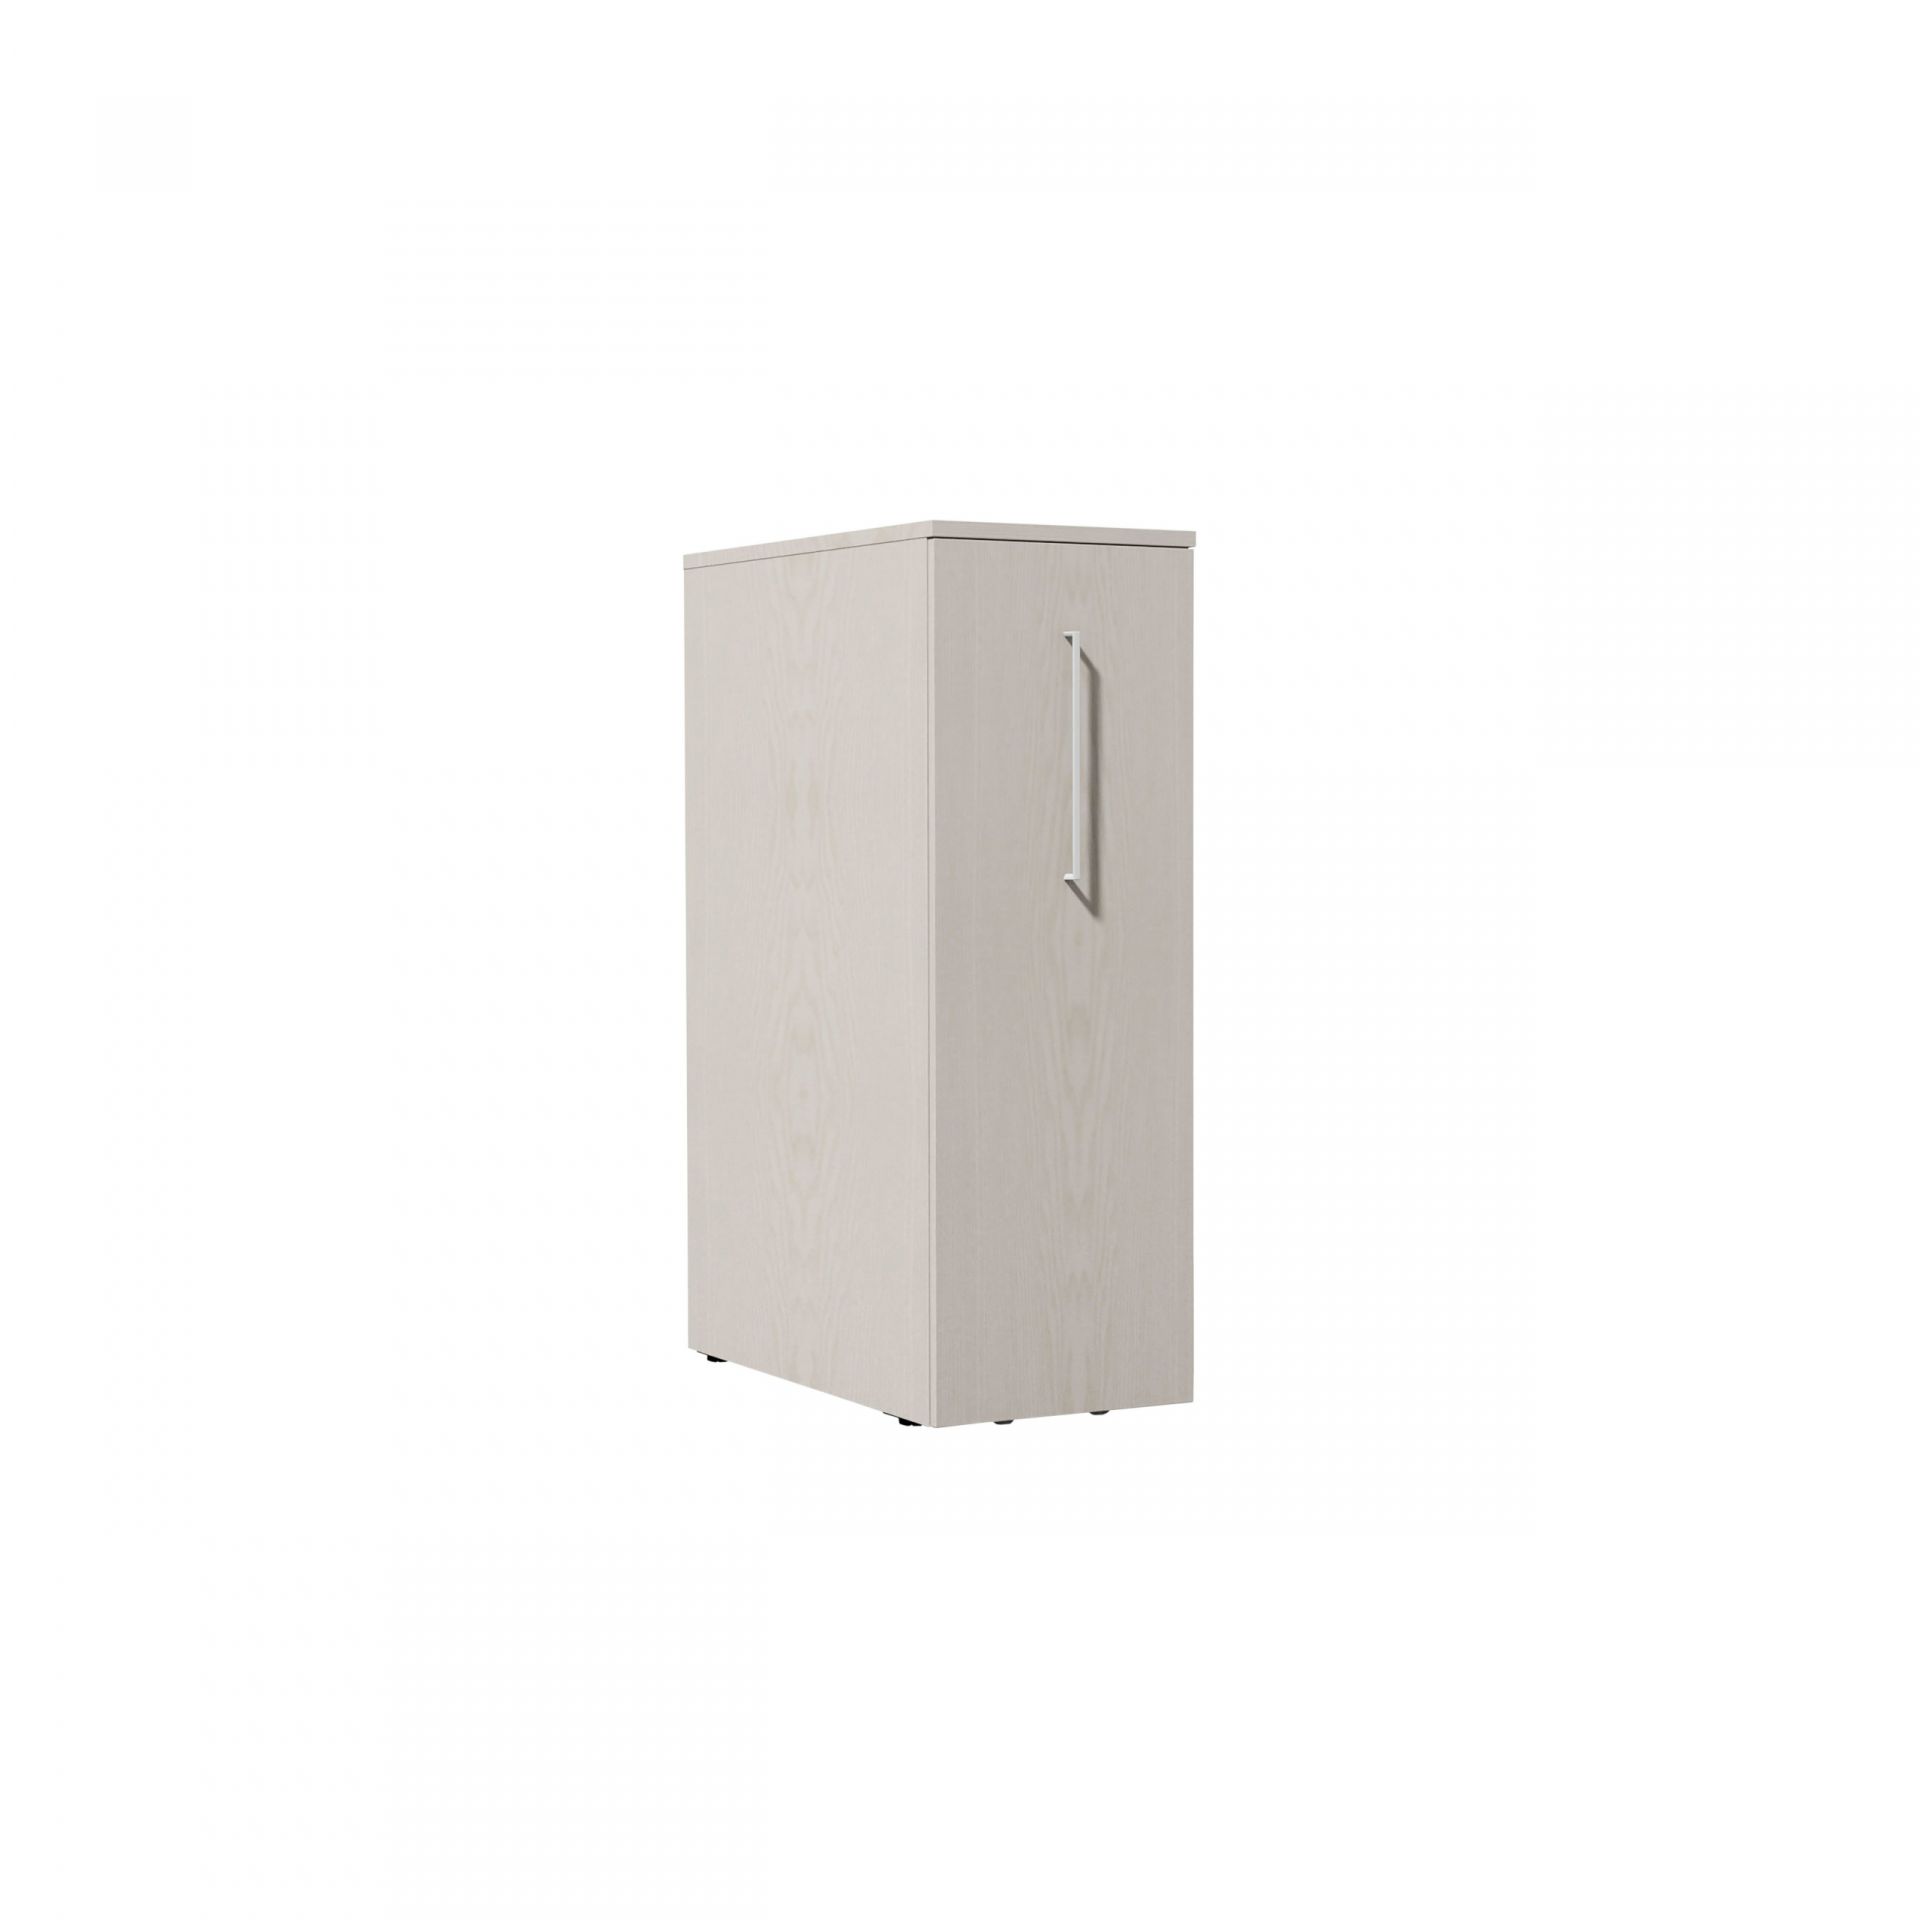 Hold Tower cabinet product image 1